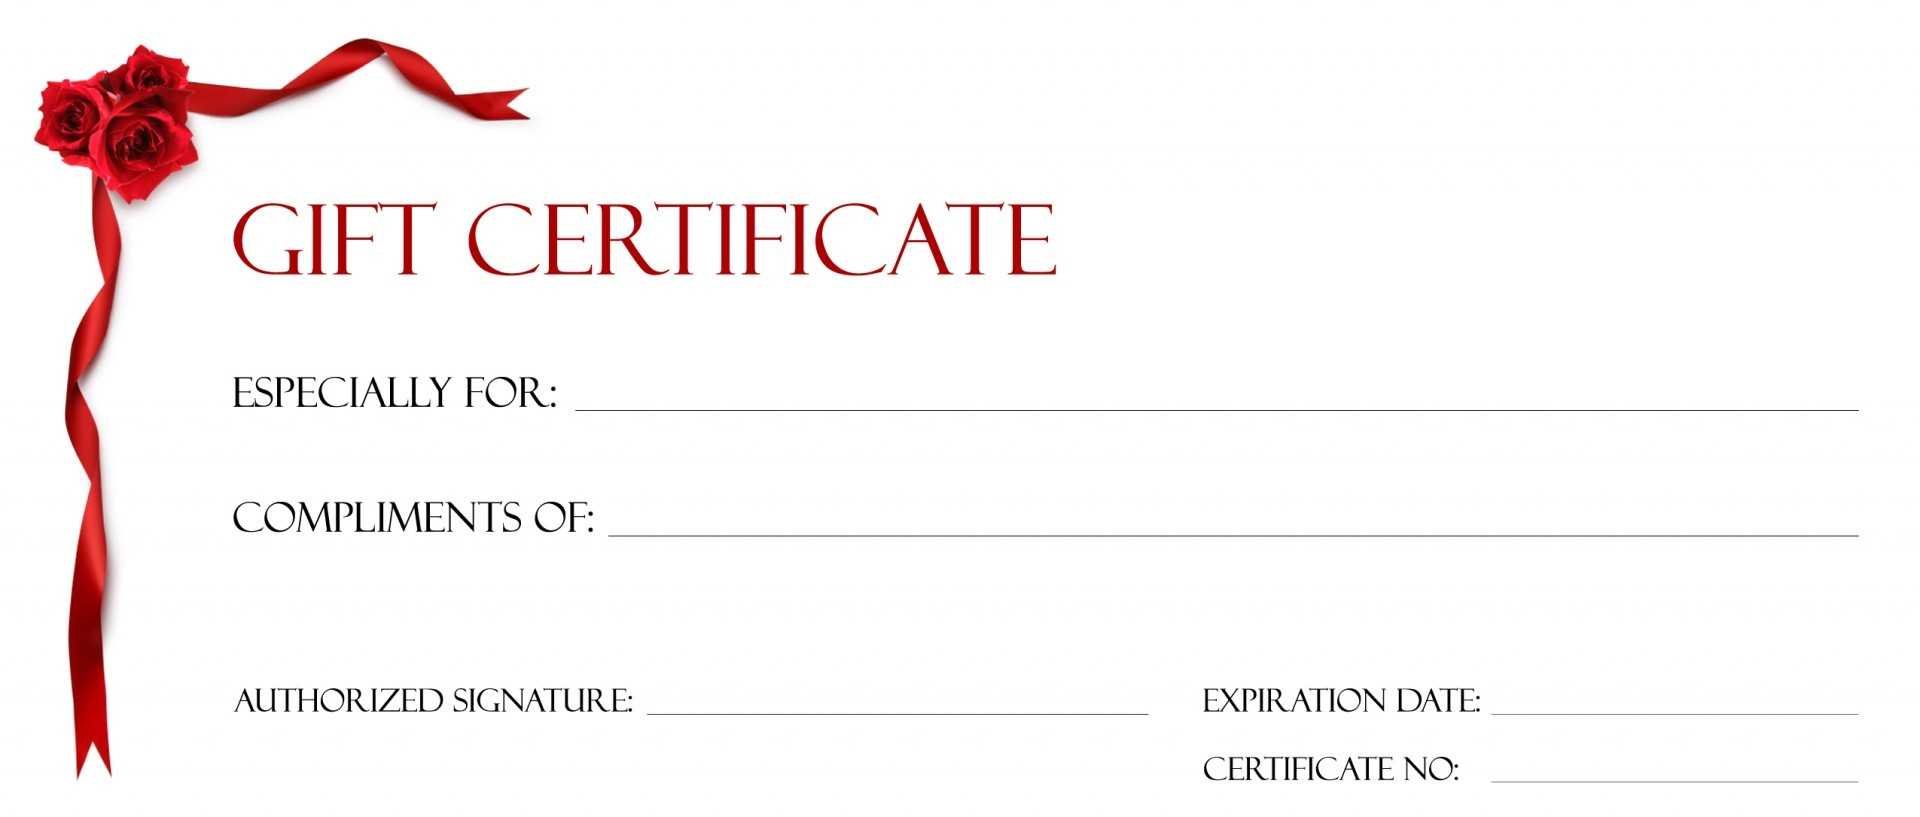 Gift Certificate Template For Google Docs With Regard To Present Certificate Templates